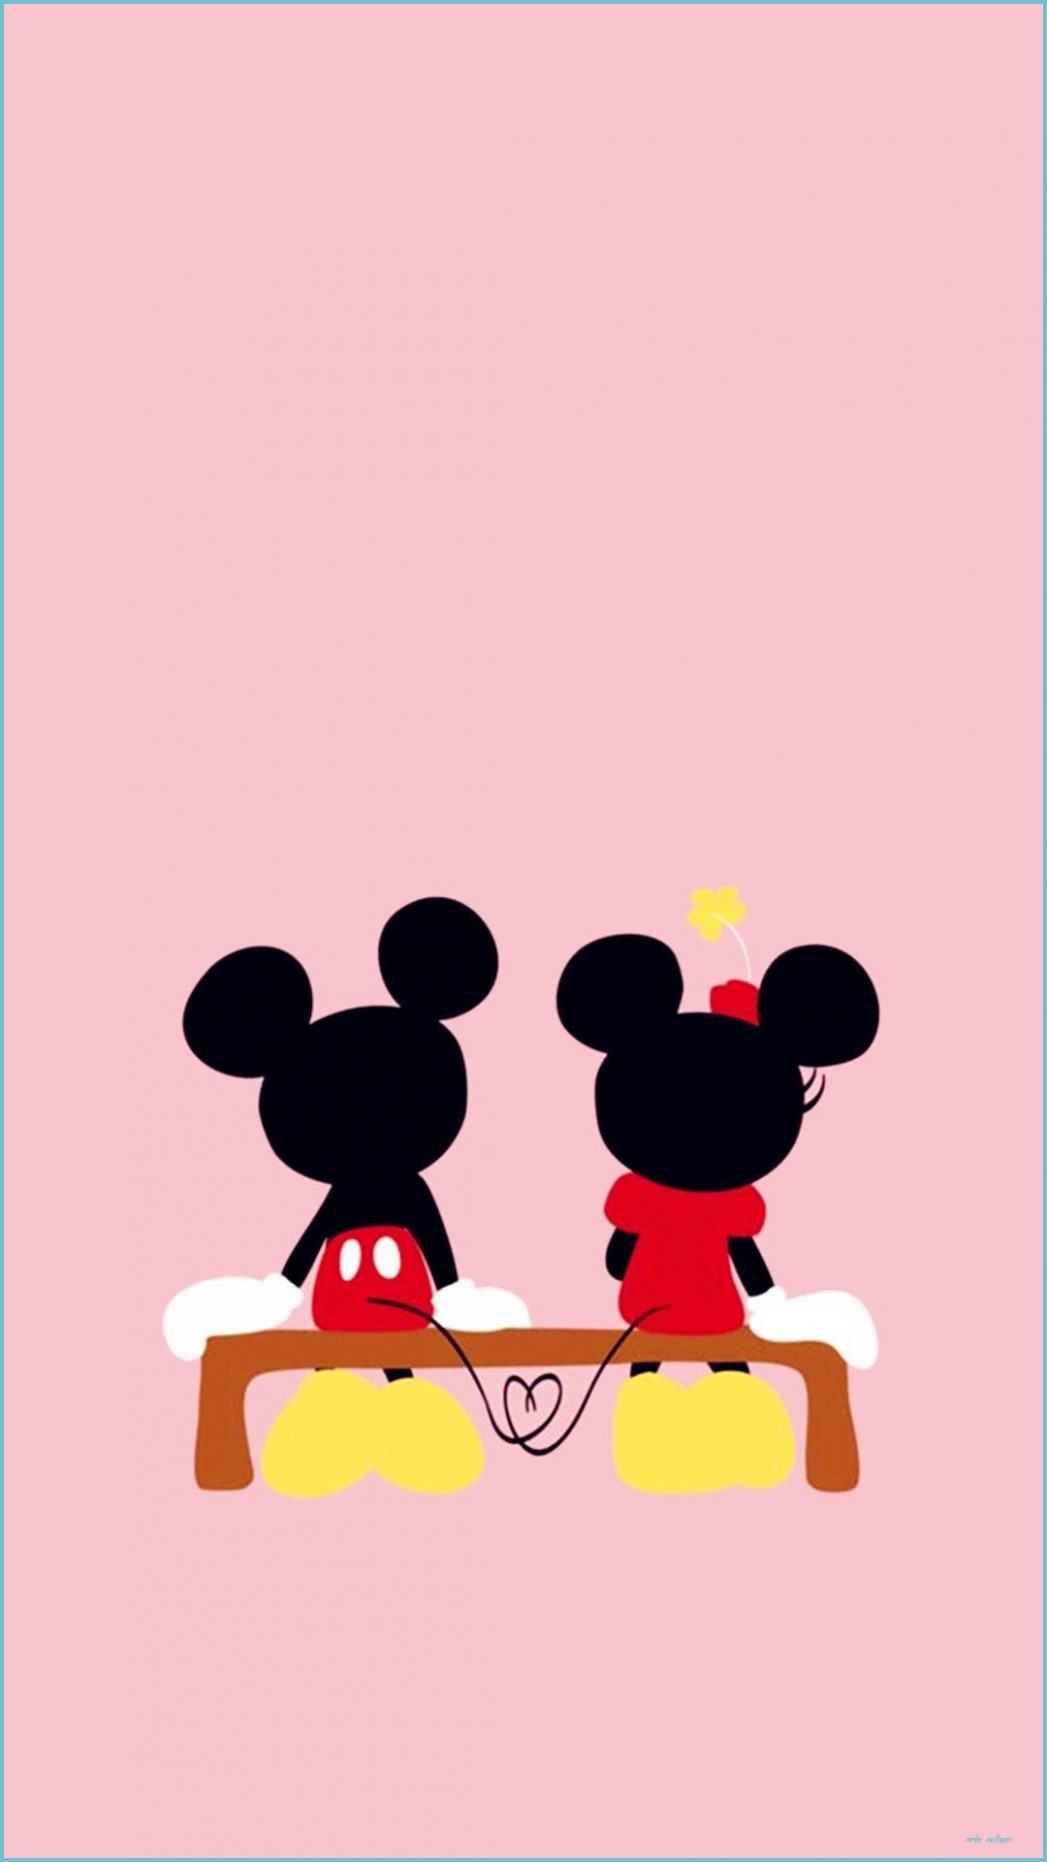 Minnie Mouse Wallpapers on WallpaperDog